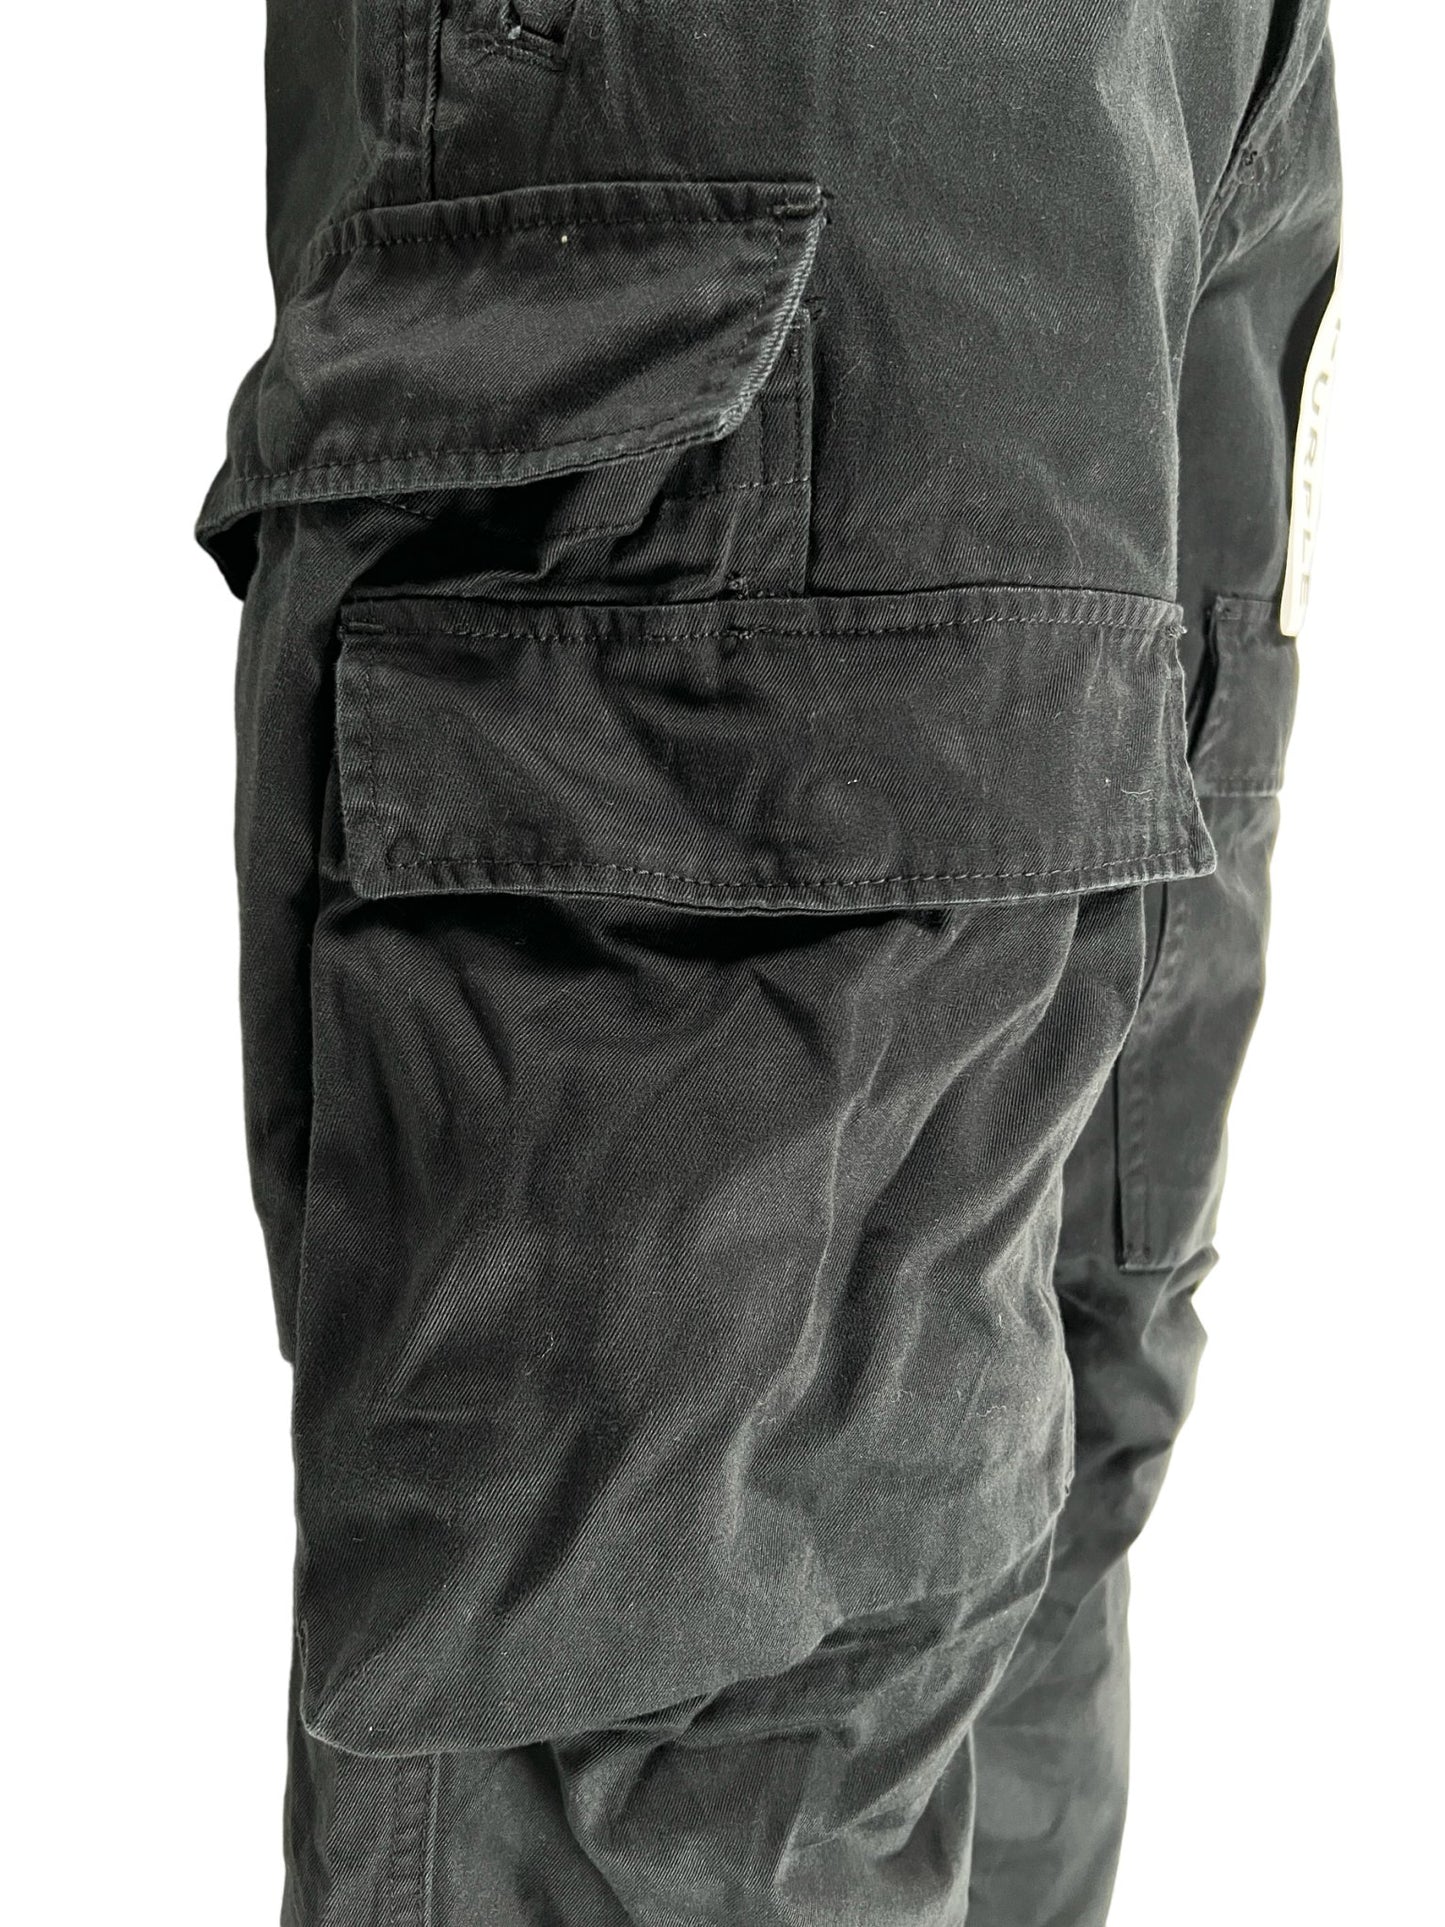 A pair of PURPLE BRAND cargo pants with multiple pockets on a white background.